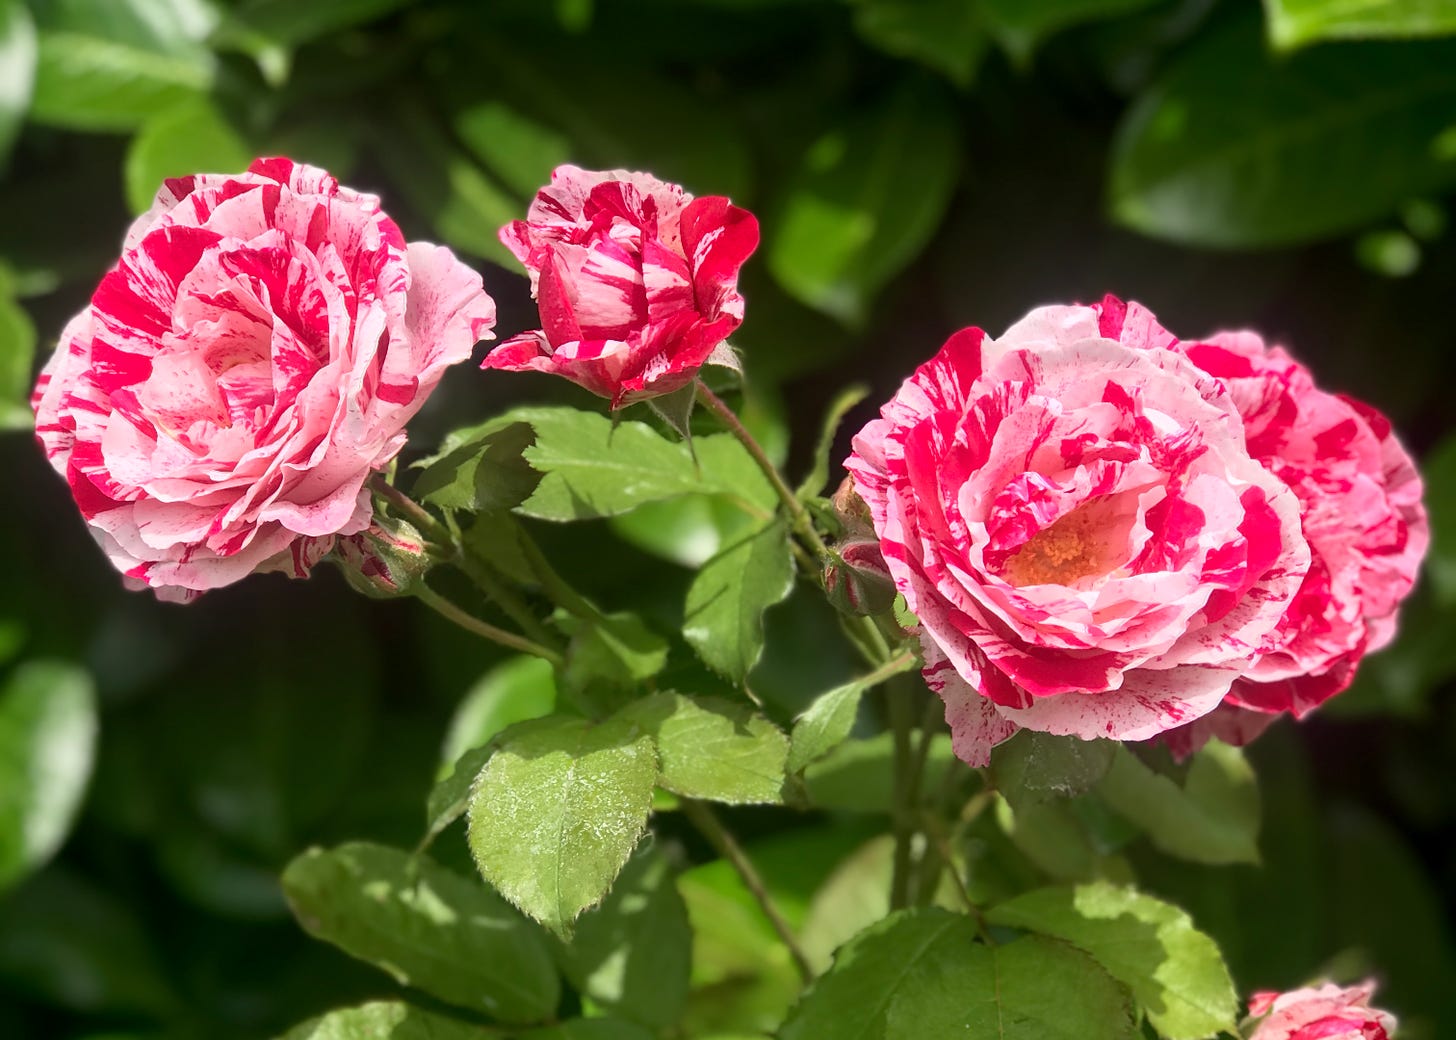 four roses on a bush that are in various stages of blooming. the roses are light pink with bright reddish-pink splotches all over them that look like paint splatters